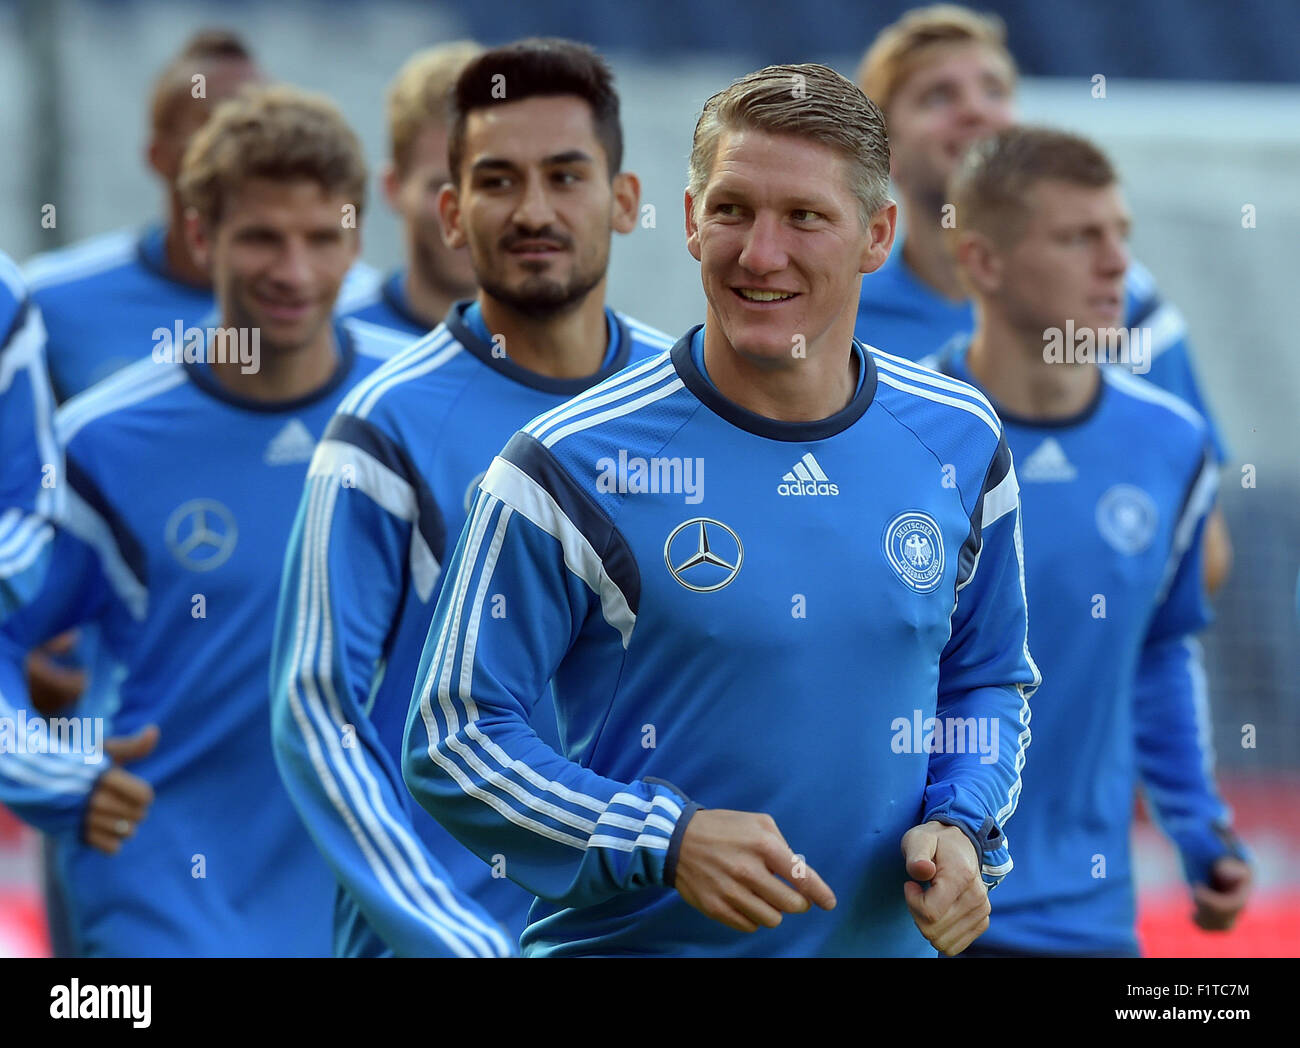 Glasgow, Great Britain. 6th Sep, 2015. Germany's Thomas Mueller (l-r), Ilkay Gundogan, Bastian Schweinsteiger, Christoph Kramer and Toni Kroos in action during the final training session of the German national soccer squad in Glasgow, Great Britain, 6 September 2015. Germany is preparing for the UEFA EURO 2016 qualification match against Scotland in Glasgow on 7 September 2015. Photo: Federico Gambarini/dpa/Alamy Live News Stock Photo